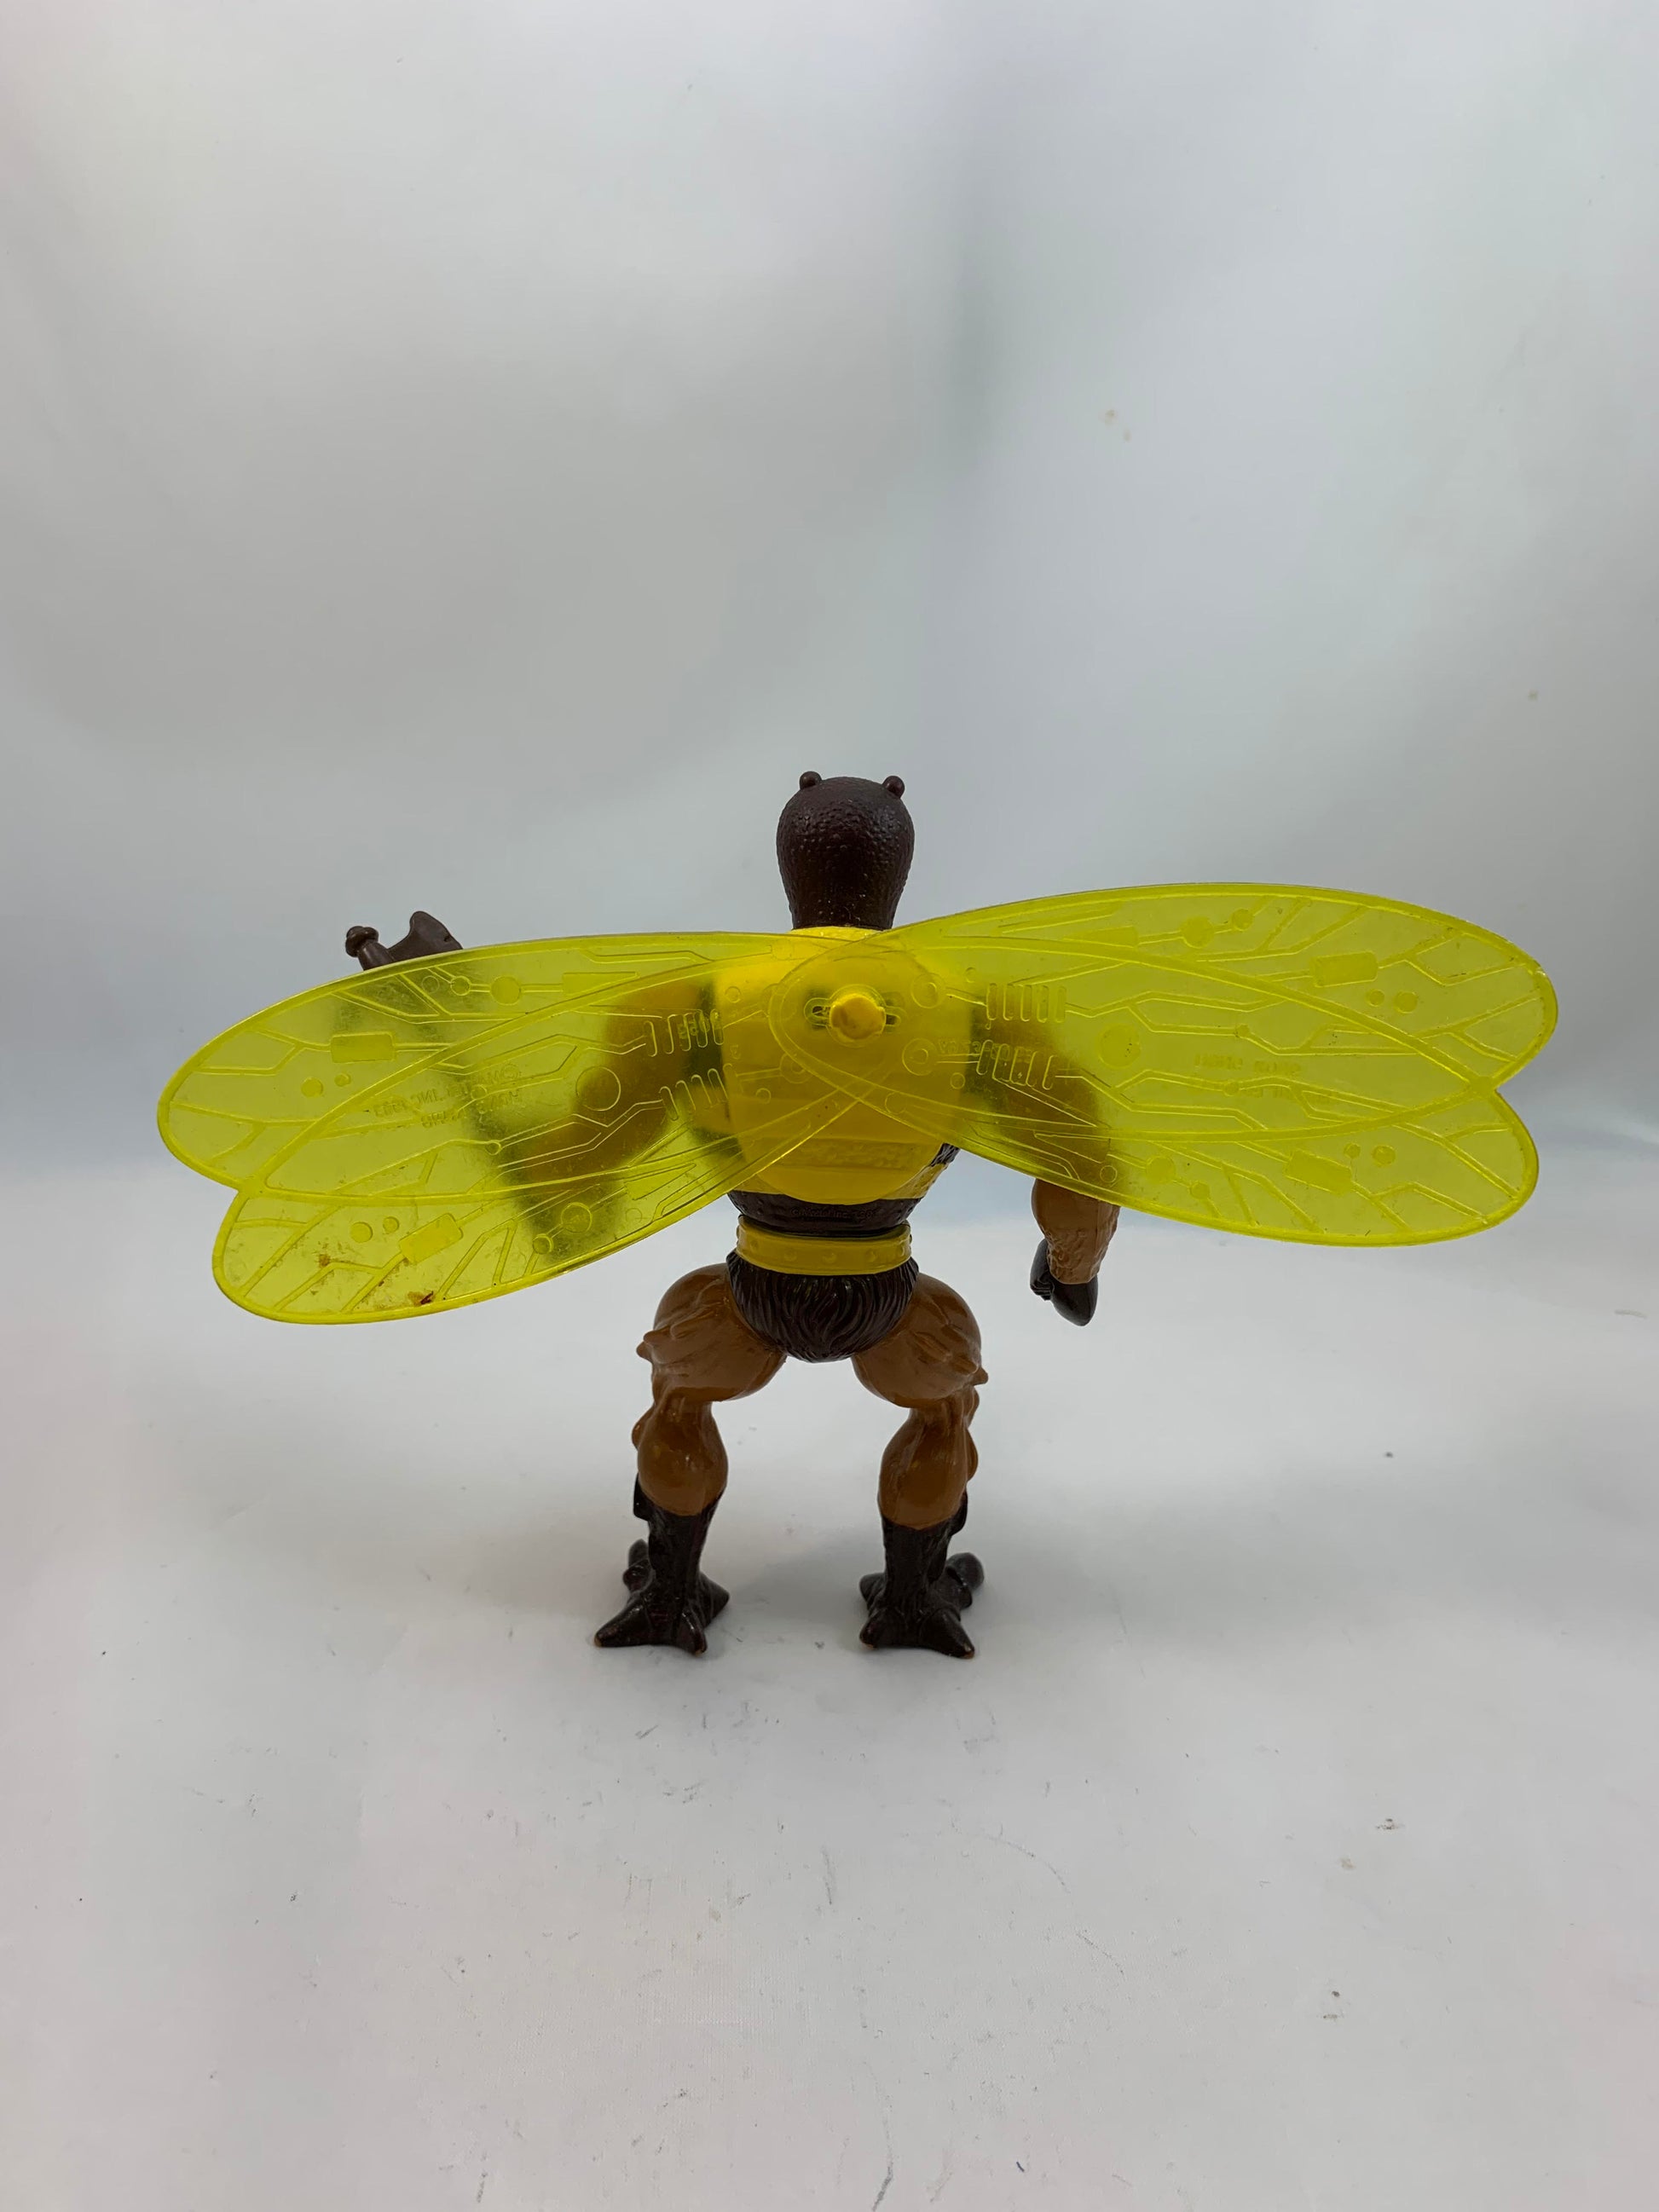 Mattel Vintage He Man Masters Of The Universe MOTU 'Buzz off' with axe Action Figure #796 - Loose